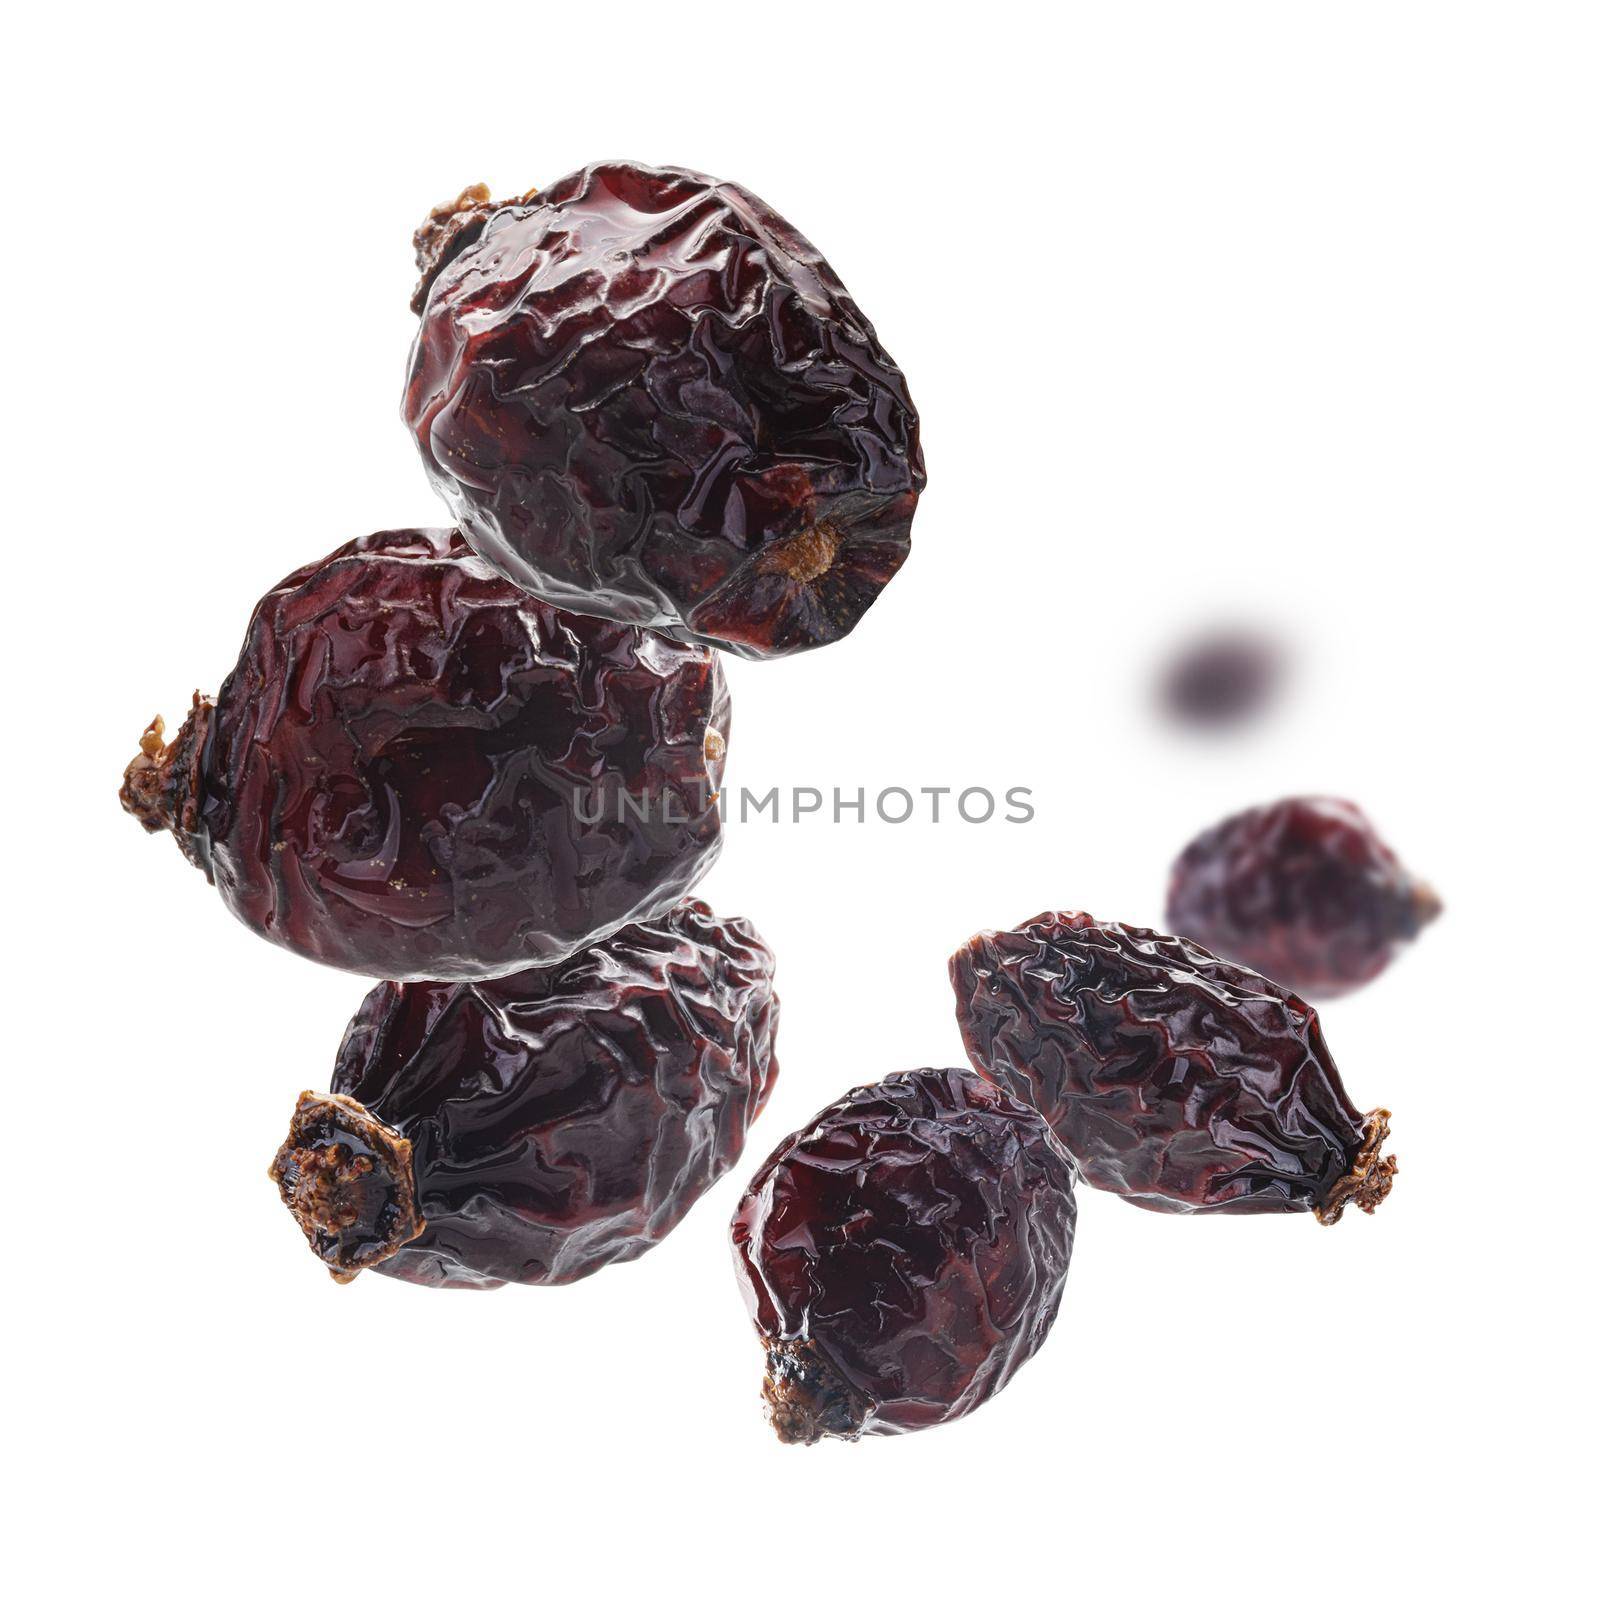 Dried rosehip berries levitate on a white background.